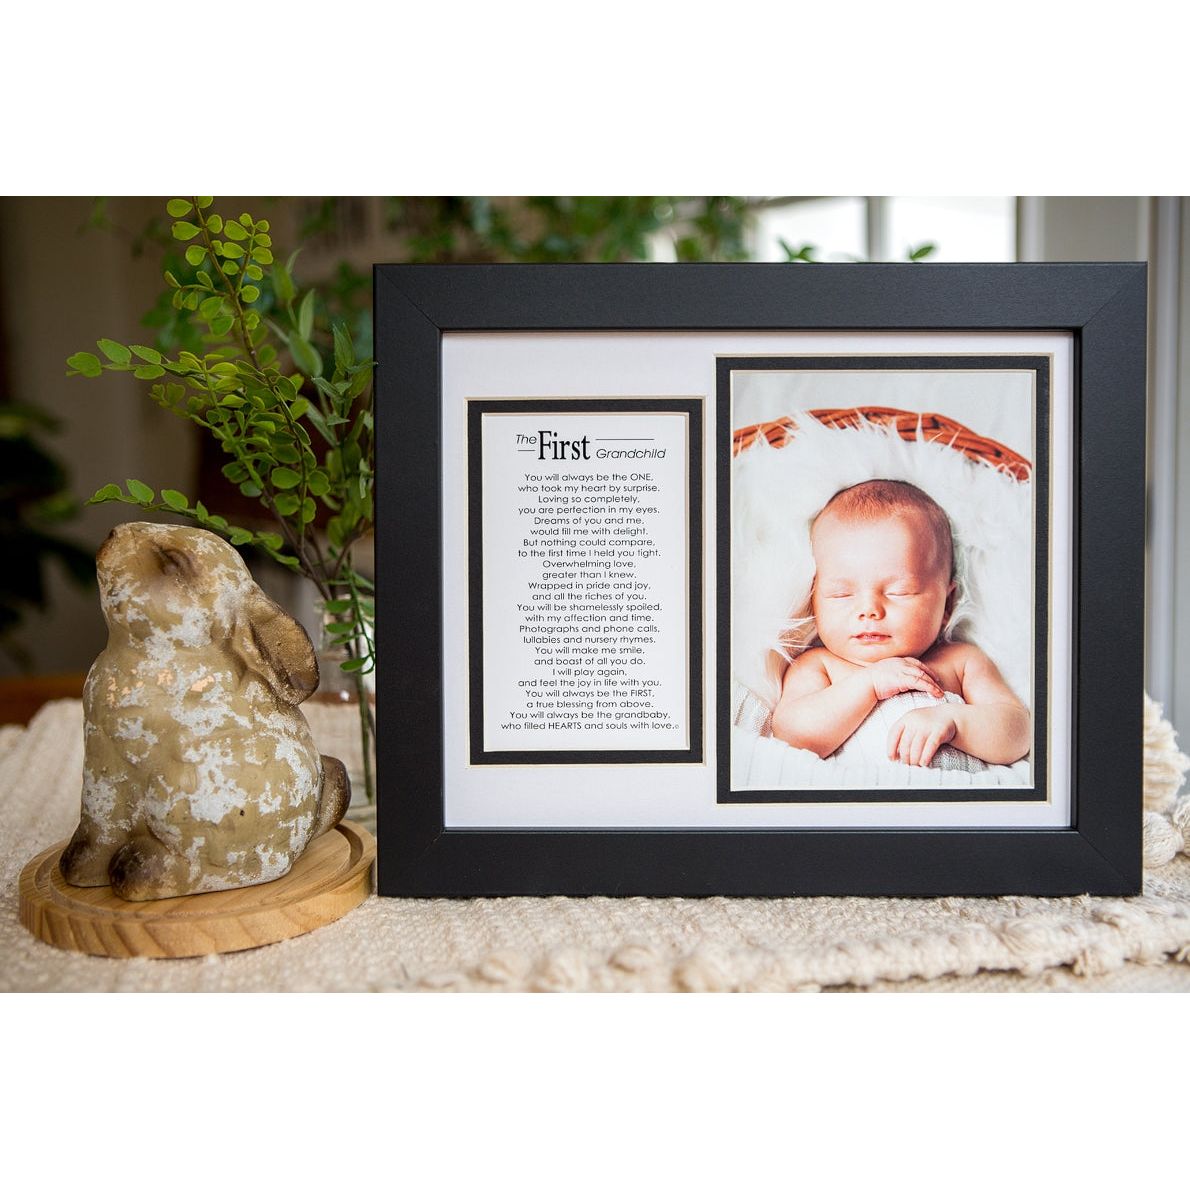 First Grandchild frame and poem featuring a baby photo.